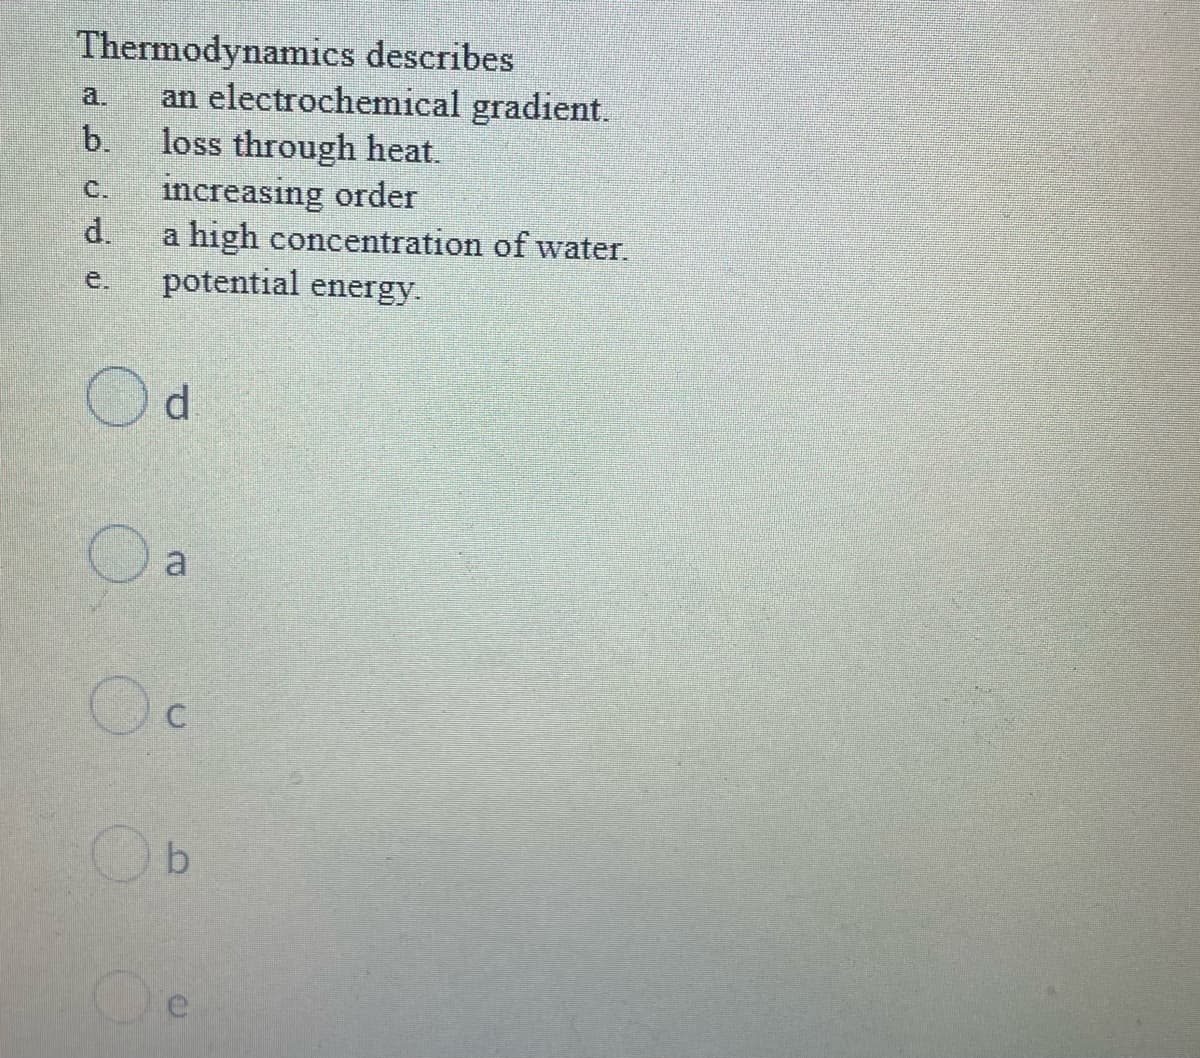 Thermodynamics describes
an electrochemical gradient.
b.
a.
loss through heat.
increasing order
d.
C.
a high concentration of water.
potential energy.
e.
d
a
O O
